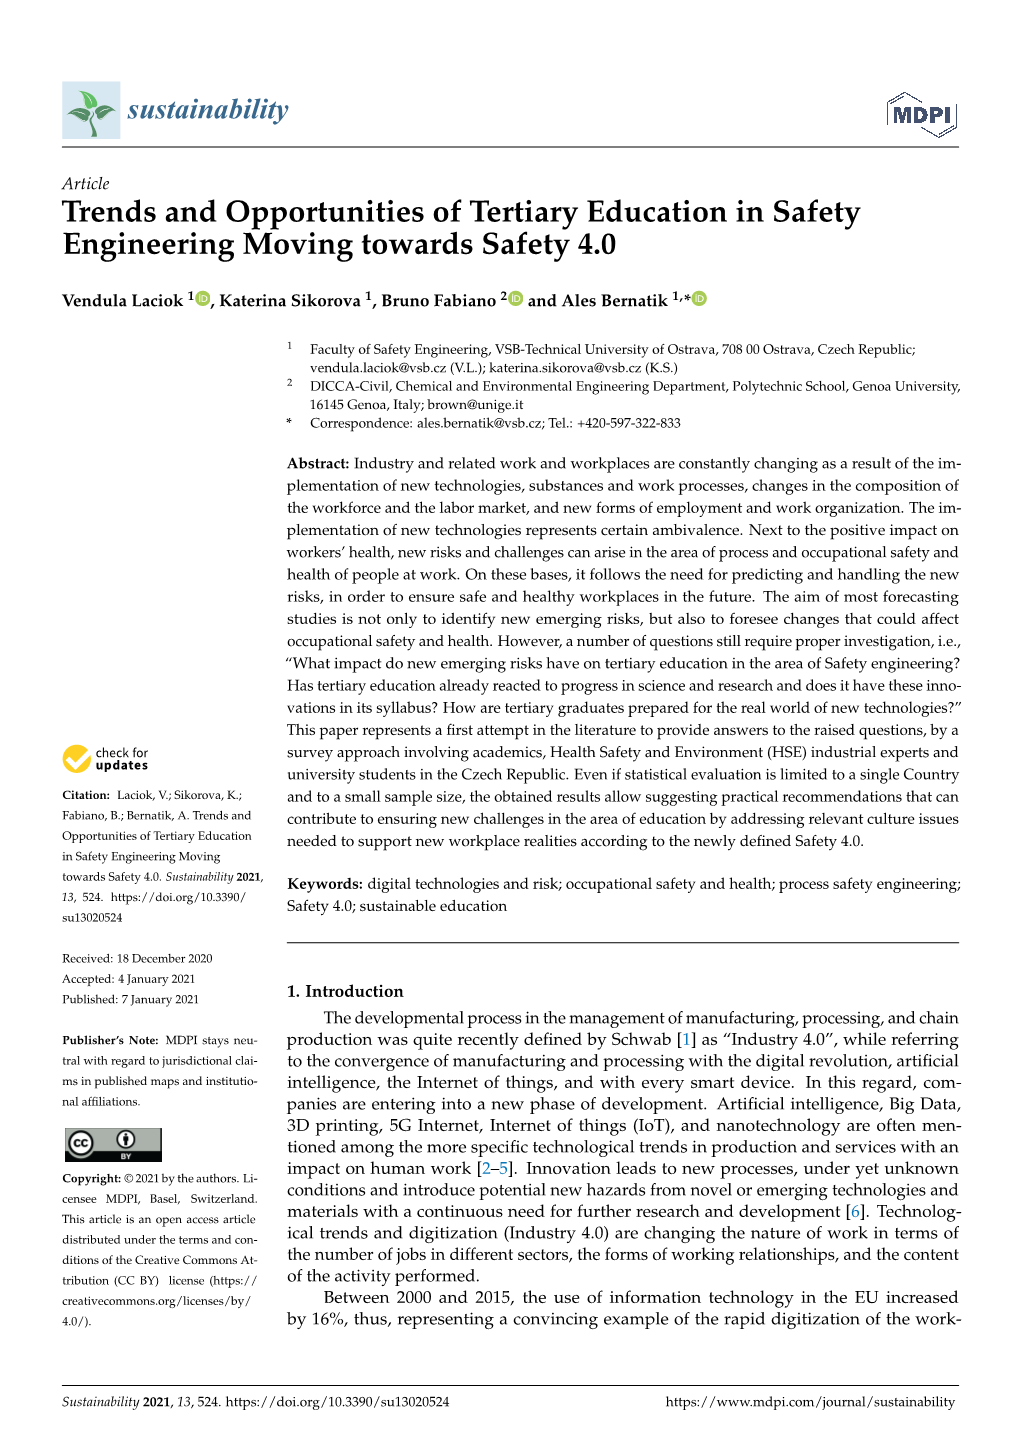 Trends and Opportunities of Tertiary Education in Safety Engineering Moving Towards Safety 4.0